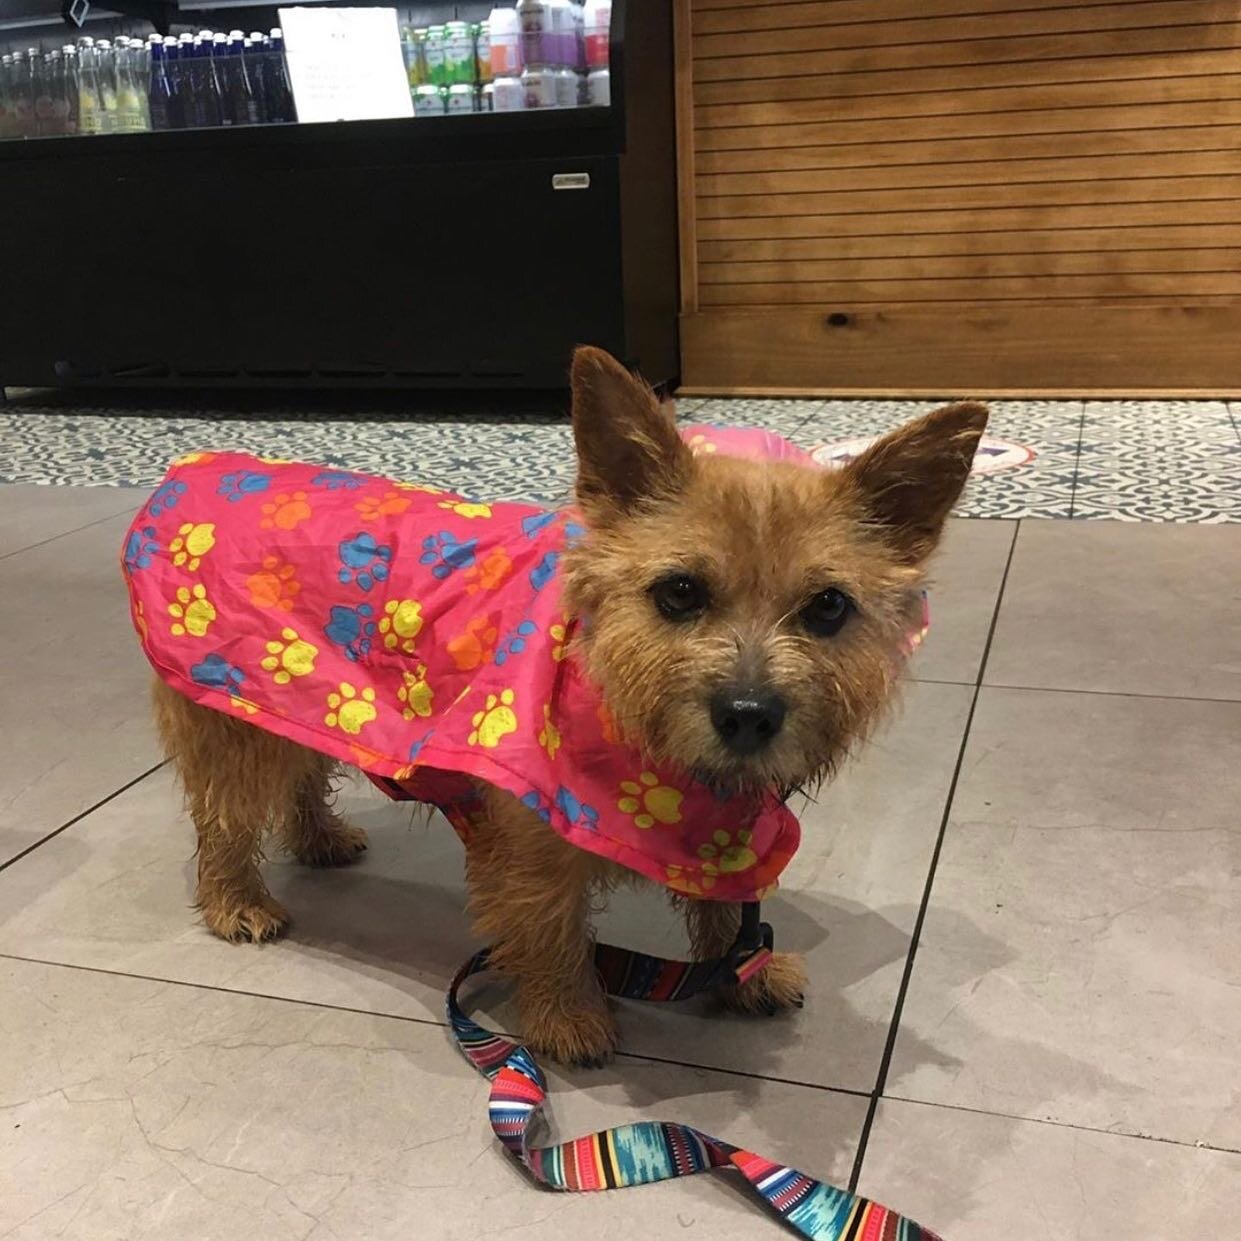 This ✨ small but mighty ✨ customer is stealing our hearts! Stop by with your furry friend and pick up a coffee, flatbread, sandwich, or pastry! Thanks for your continued support of OUR small but mighty caf&eacute;! #chezlilydc #supportlocal #dogfrien